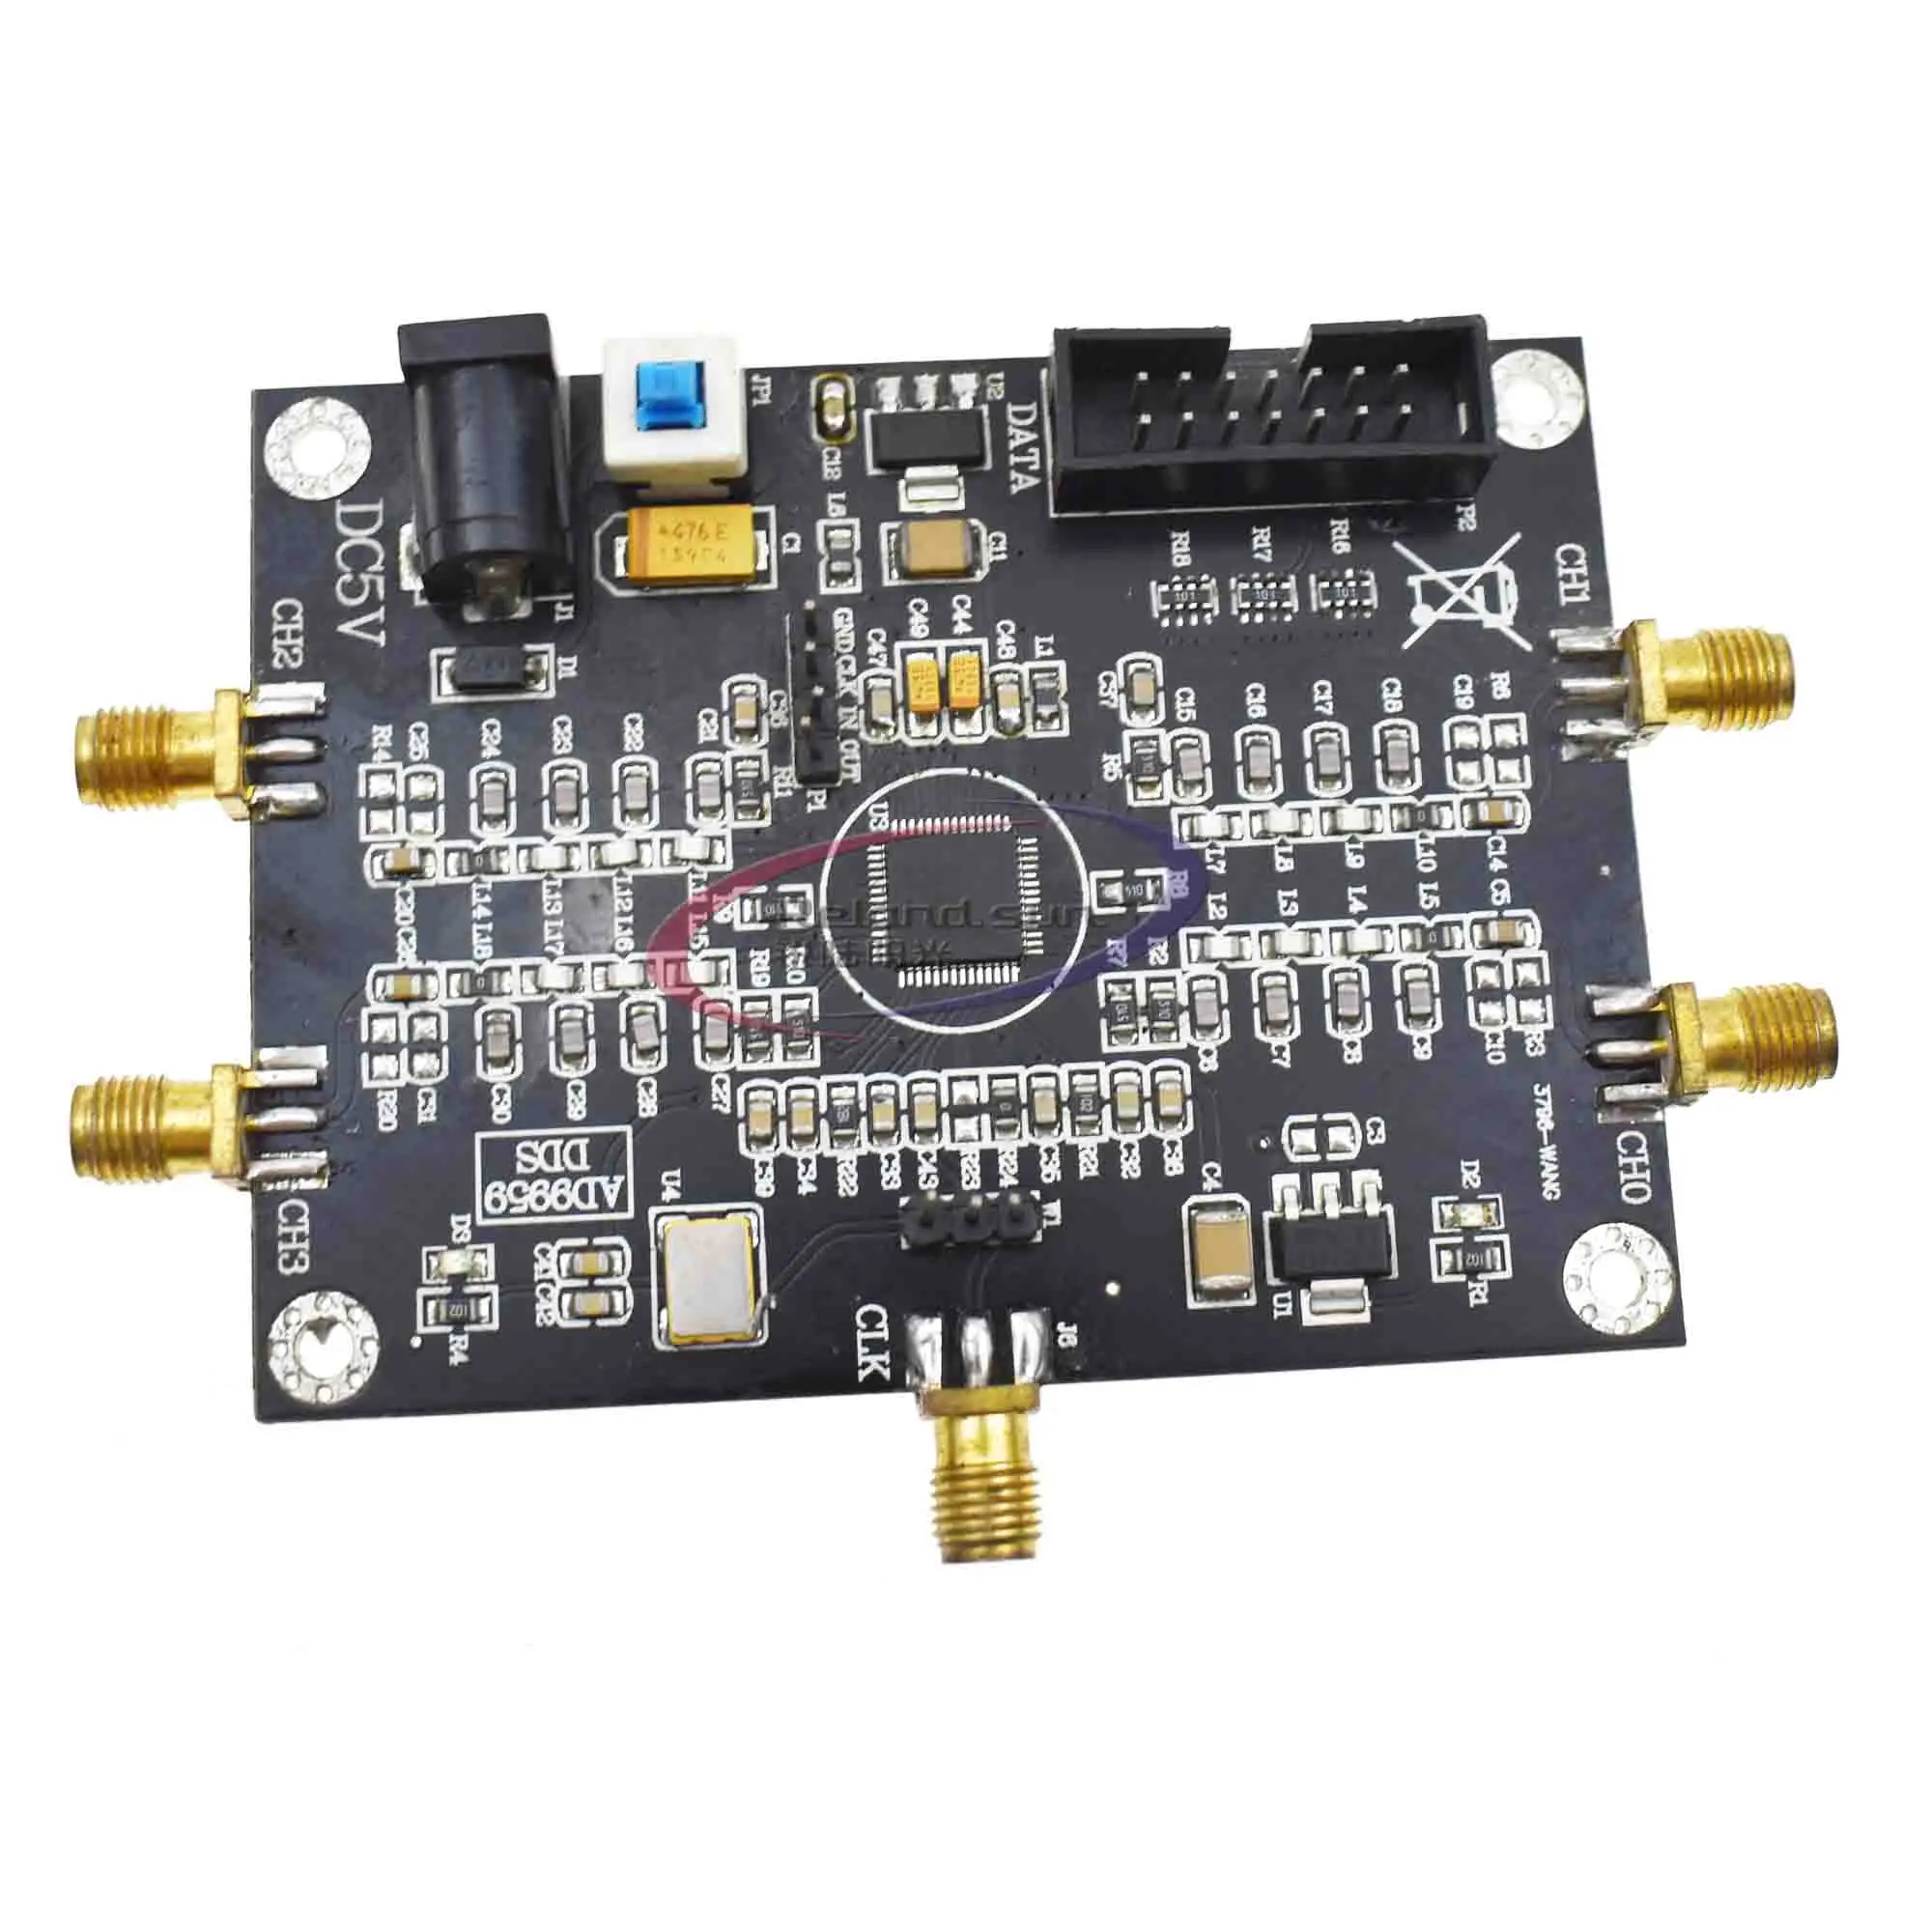 Details about   LCD Display DDS Driver Board Drive Module AD9854 AD9954 AD9851 AD9833 AD9834 